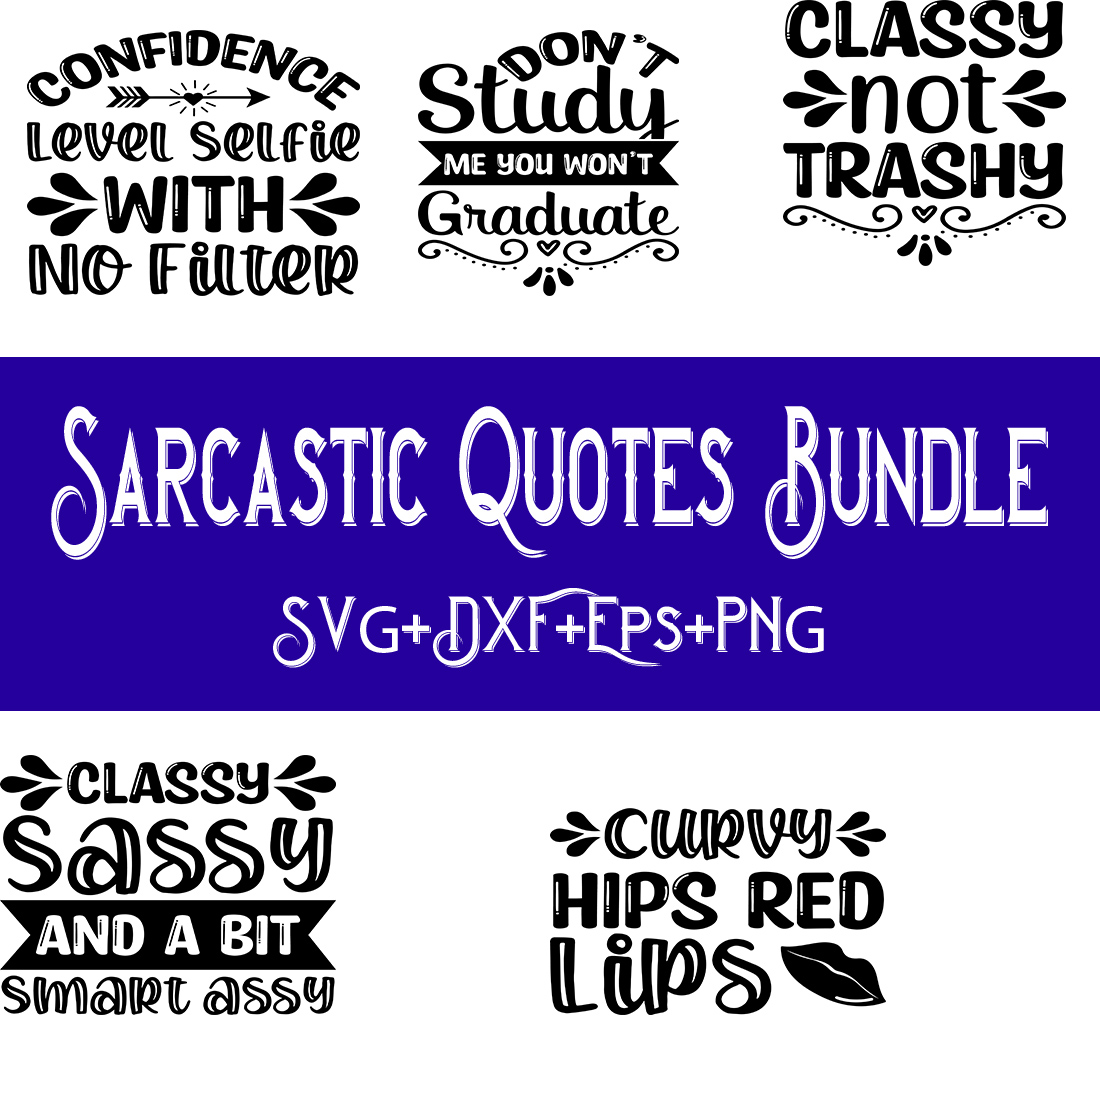 Sarcastic quotes bundle svg and png.